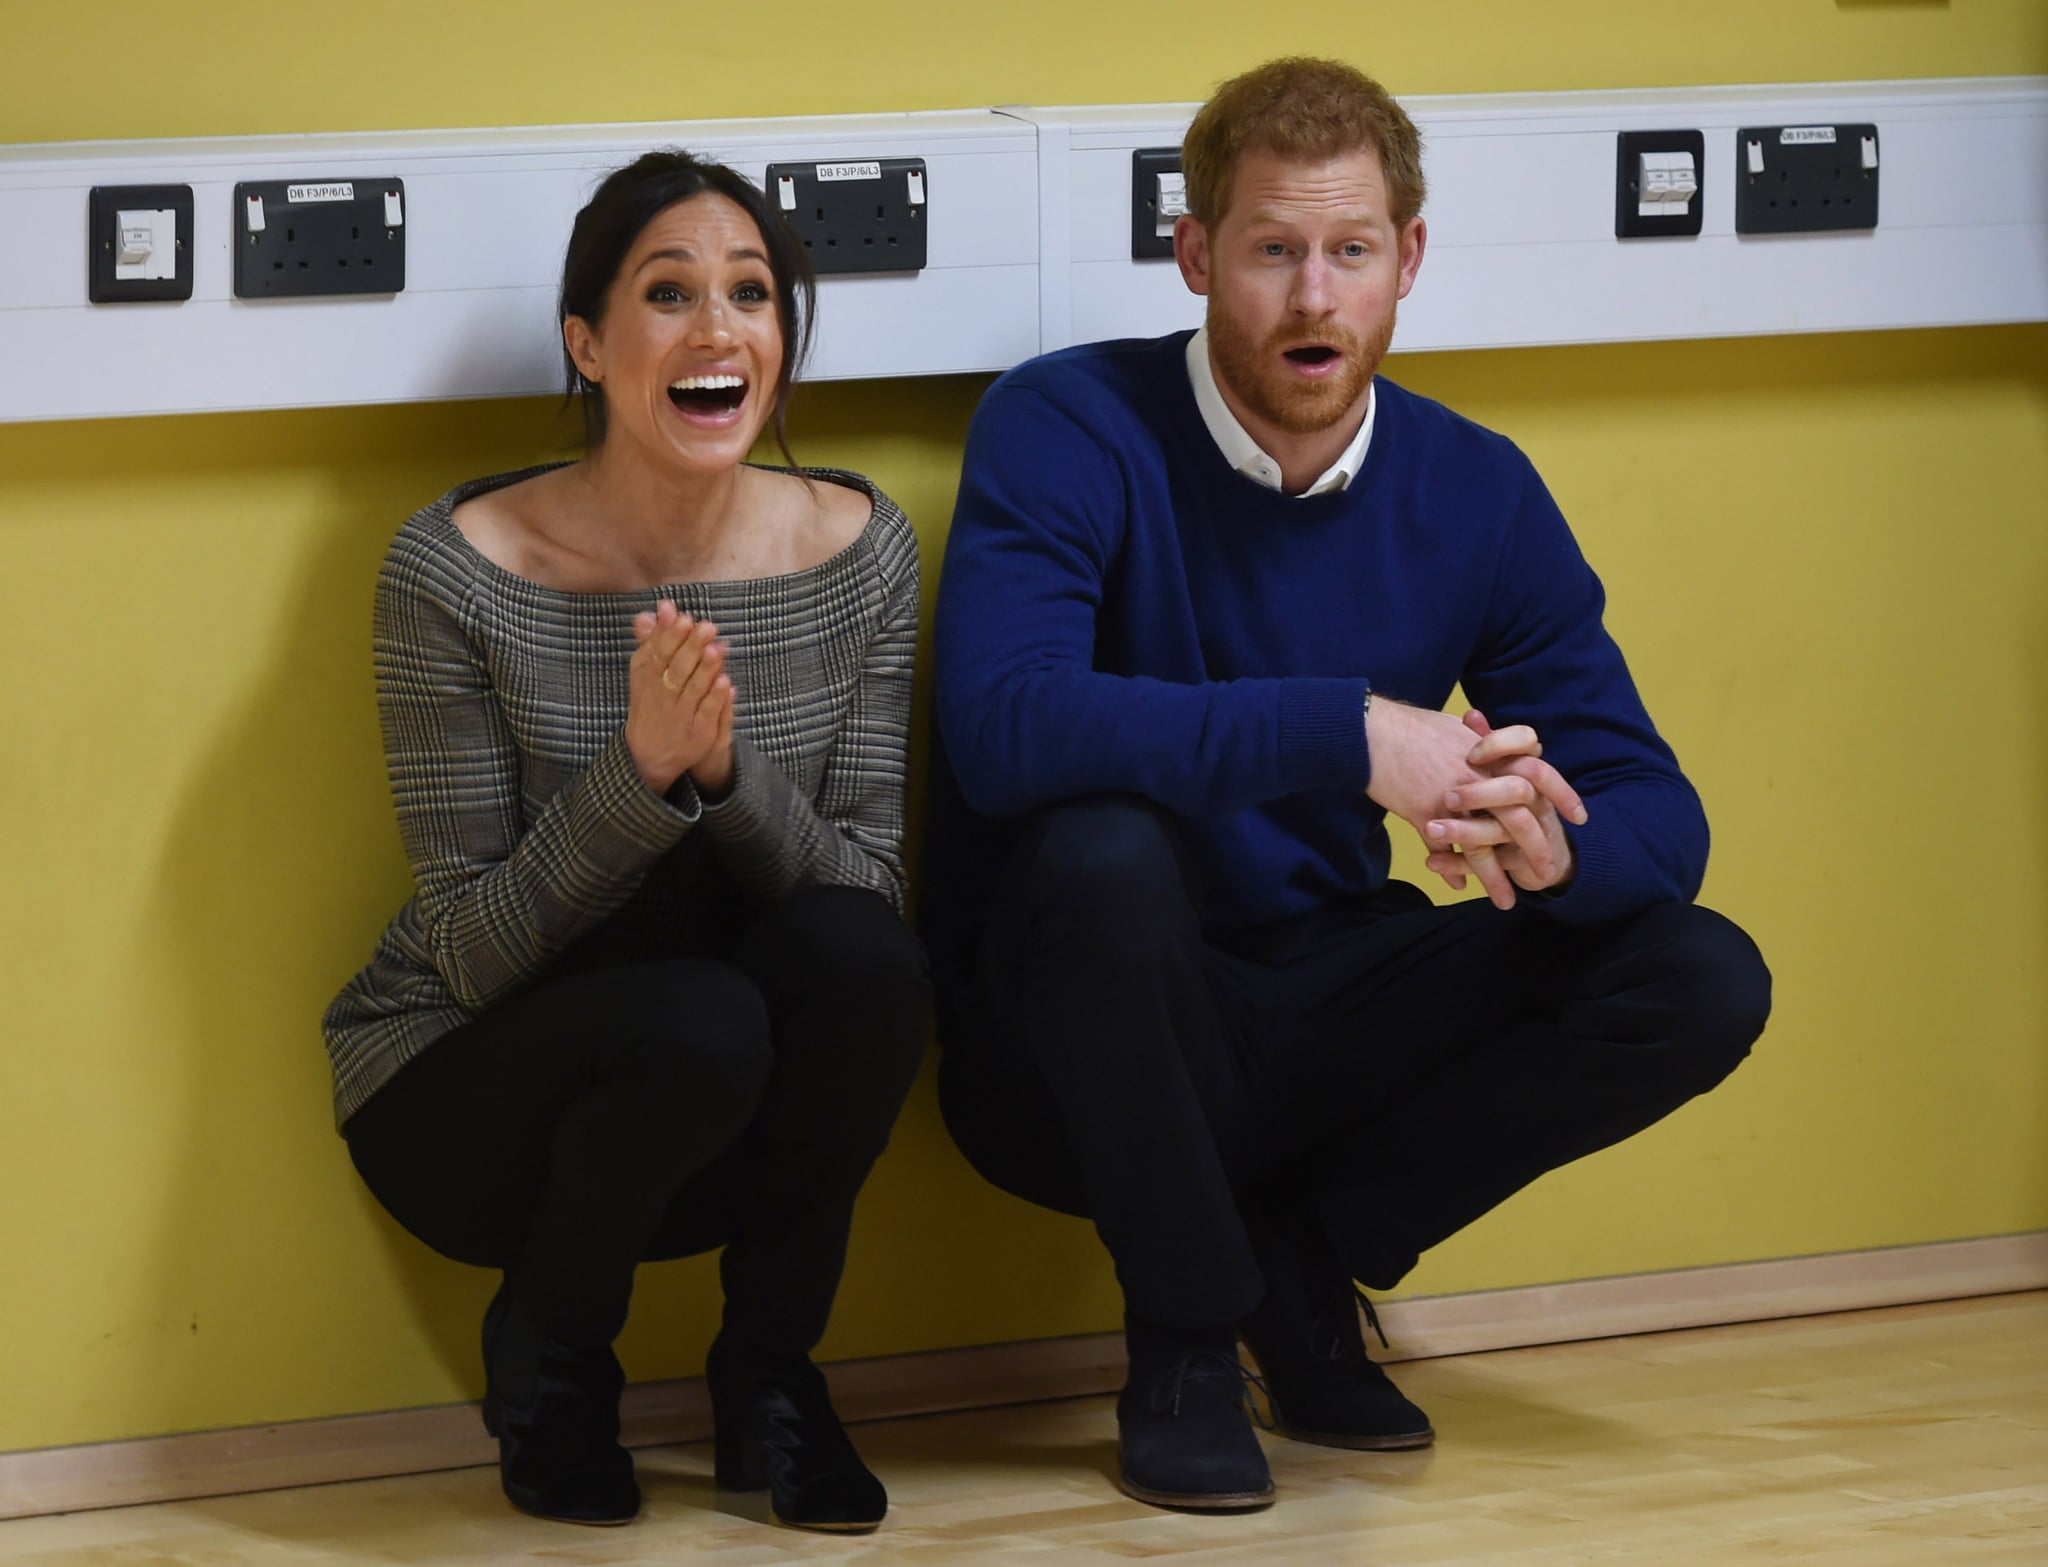 CARDIFF, WALES - JANUARY 18: Prince Harry and his fiancee Meghan Markle attend a street dance class during their visit to Star Hub on January 18, 2018 in Cardiff, Wales.  (Photo by Geoff Pugh - WPA Pool/Getty Images)